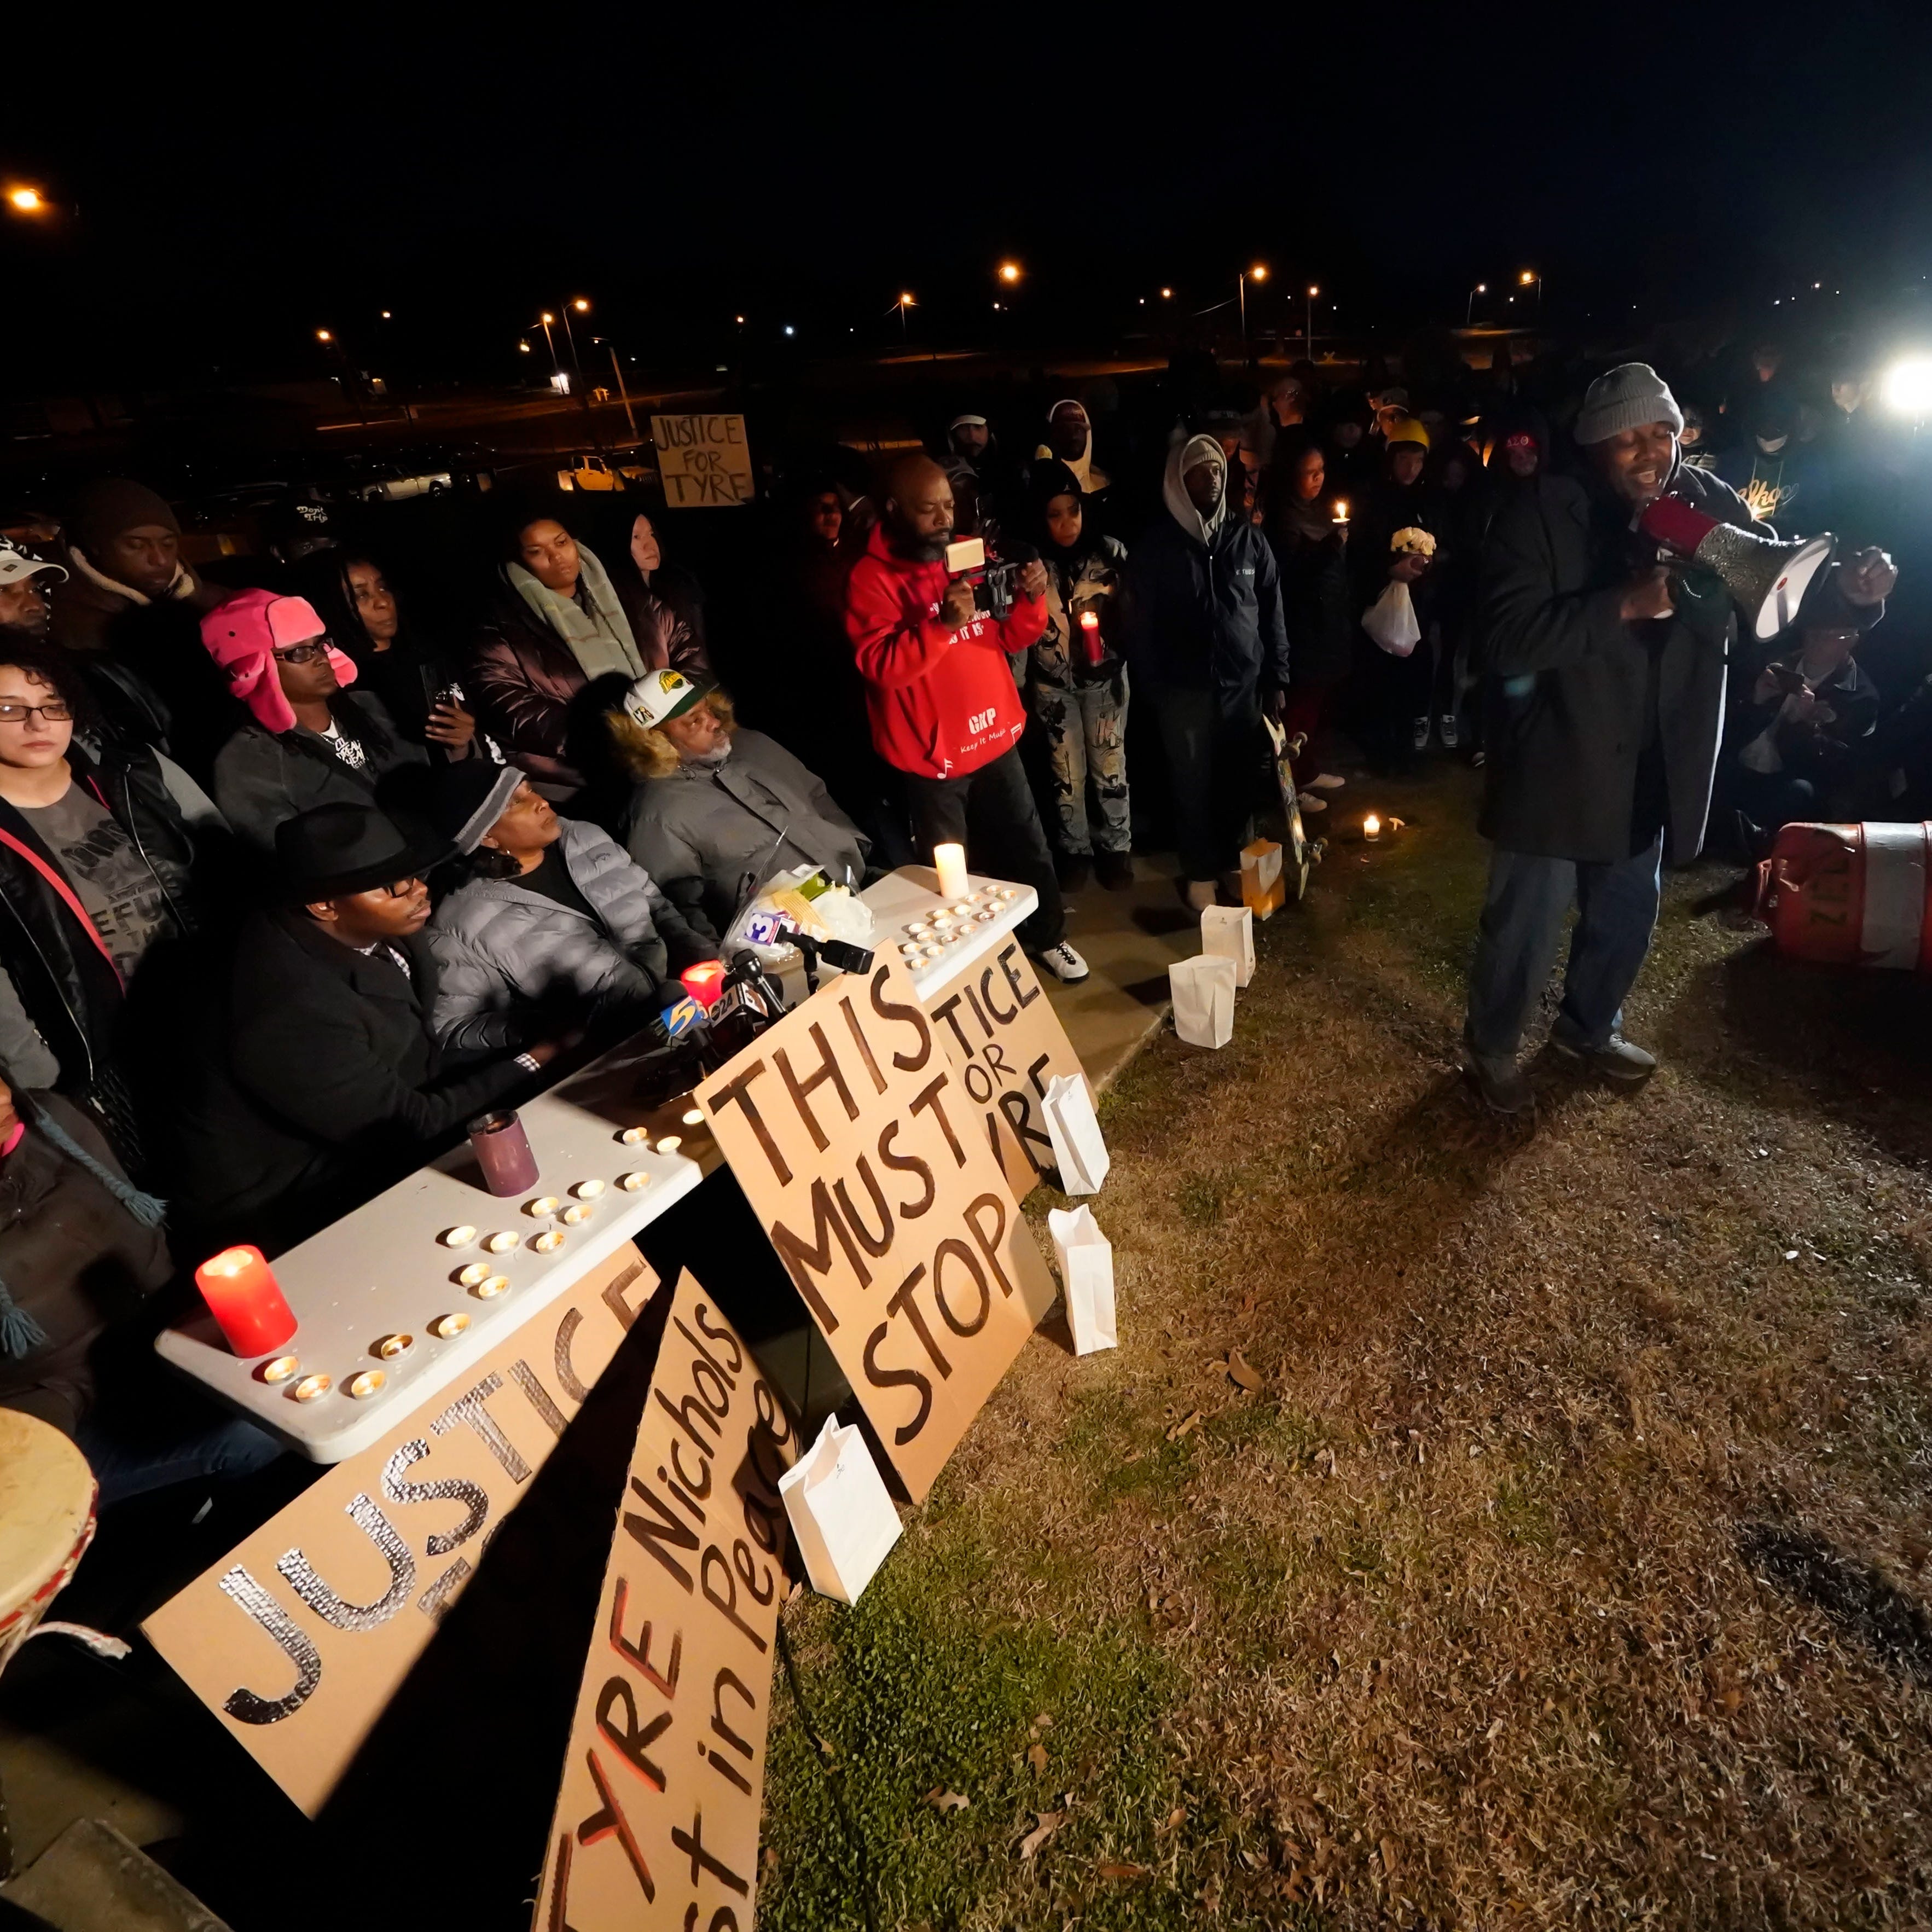 Rev. Andre E Johnson, of the Gifts of Life Ministries, preaches at a candlelight vigil for Tyre Nichols, who died after being beaten by Memphis police officers, in Memphis, Tenn., Thursday, Jan. 26, 2023. Behind him, seated center, are Tyre's mother RowVaughn Wells and his stepfather Rodney Wells. (AP Photo/Gerald Herbert)